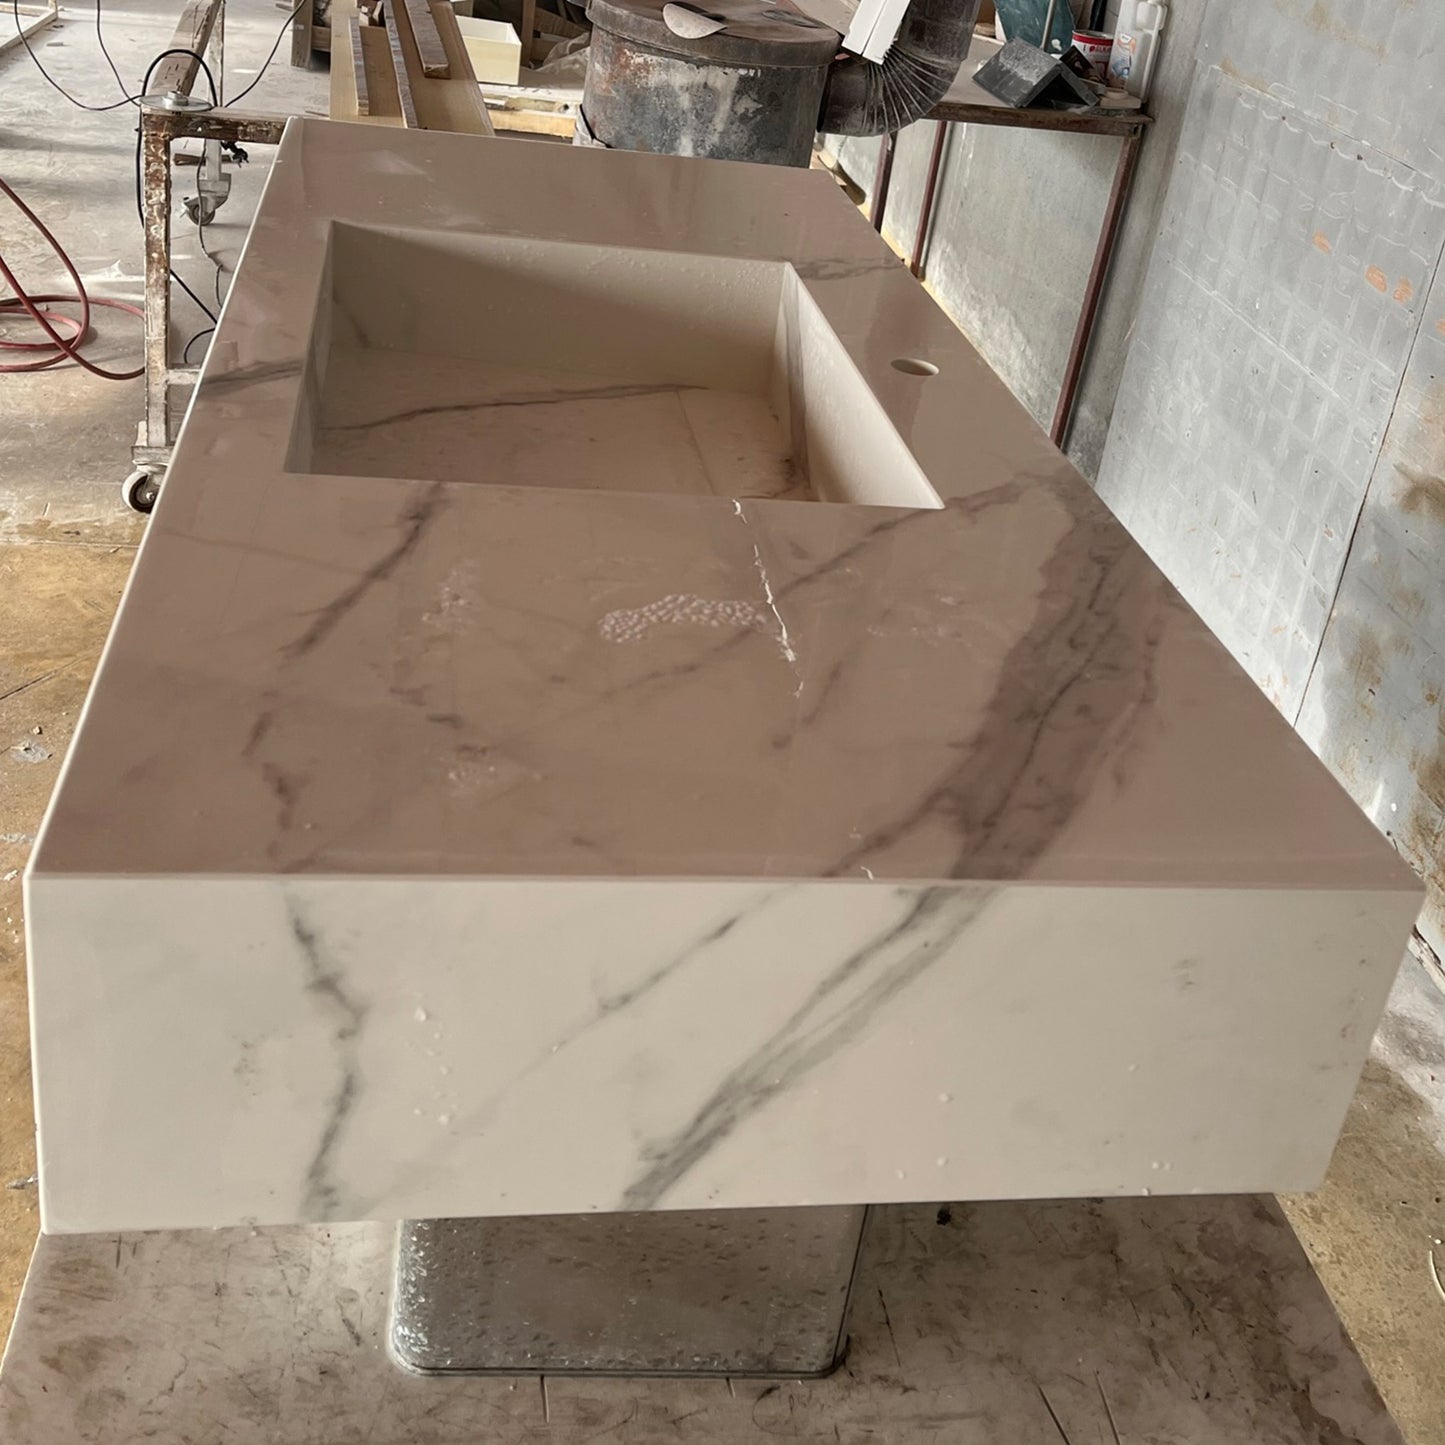 HANDCRAFTED EXTRA STATUARIO HIGH ENGINEERED PORCELAIN SINK